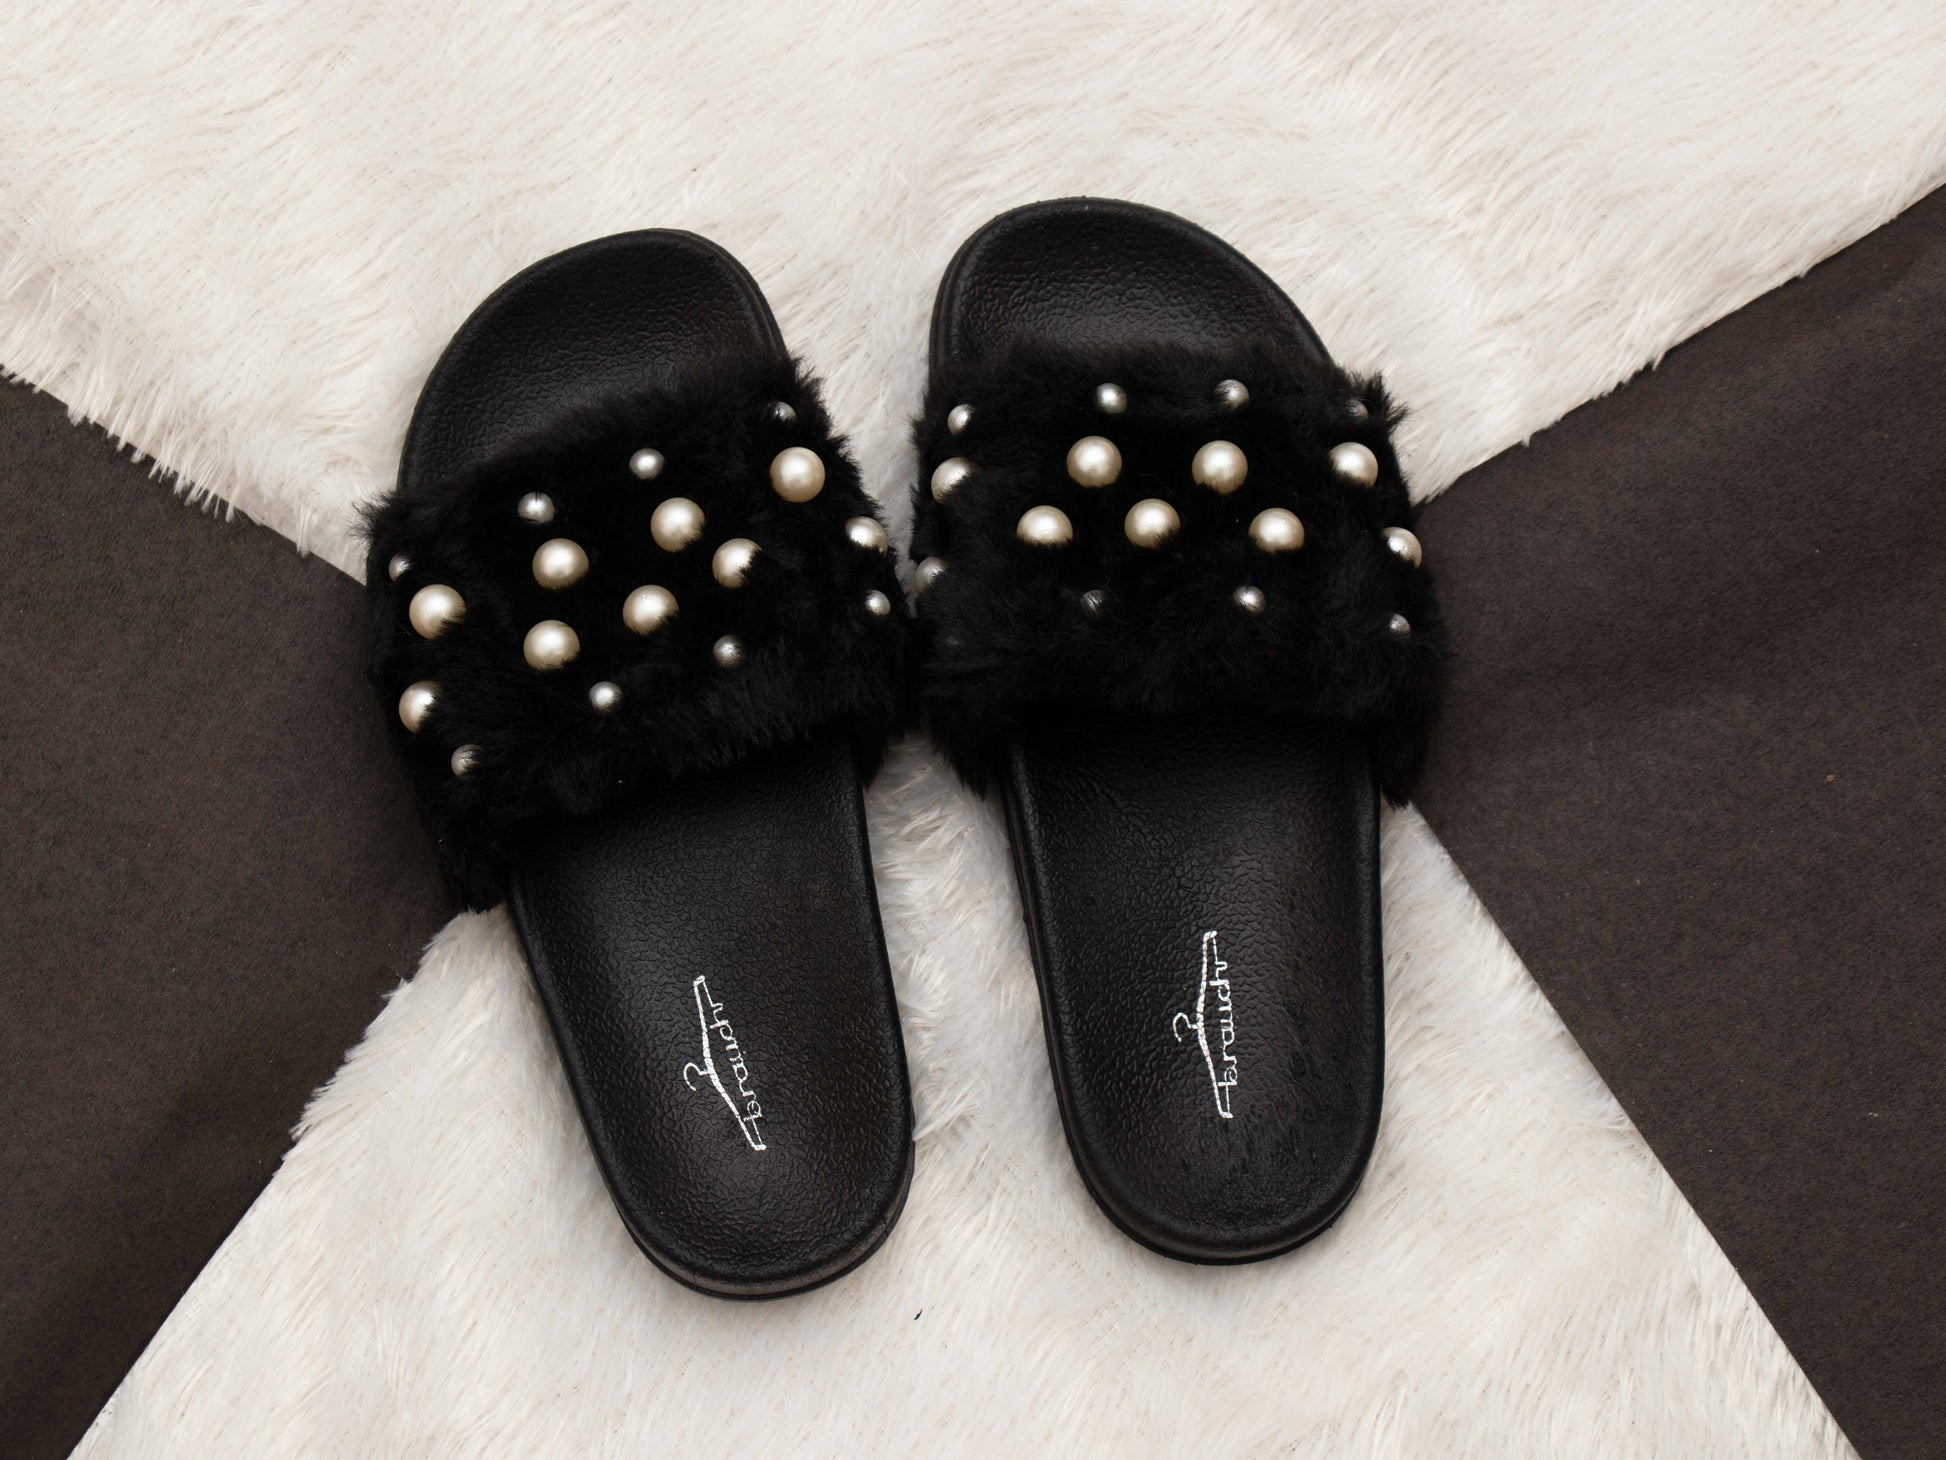 Brauch Slippers - Buy Brauch Slippers Online at Best Price - Shop